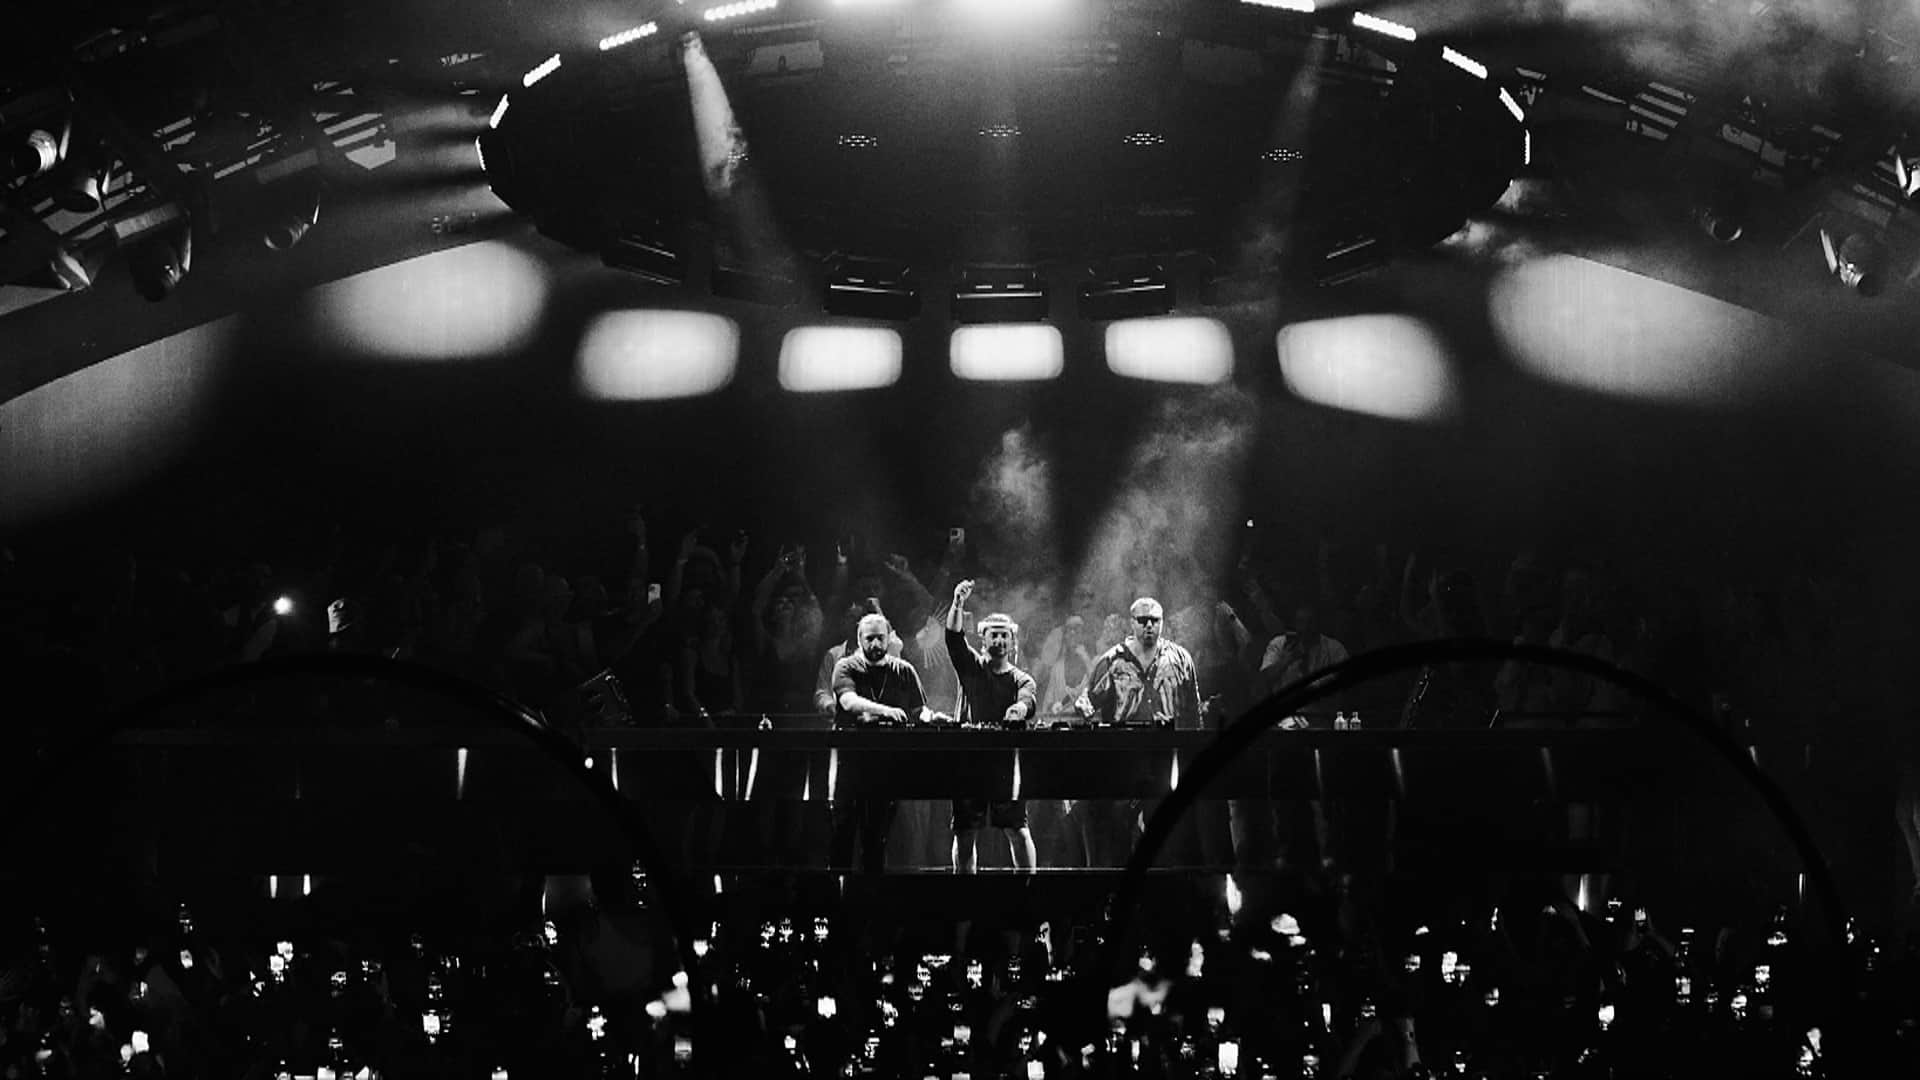 Swedish House Mafia debut new collaboration with Alicia Keys at San Francisco show: Watch